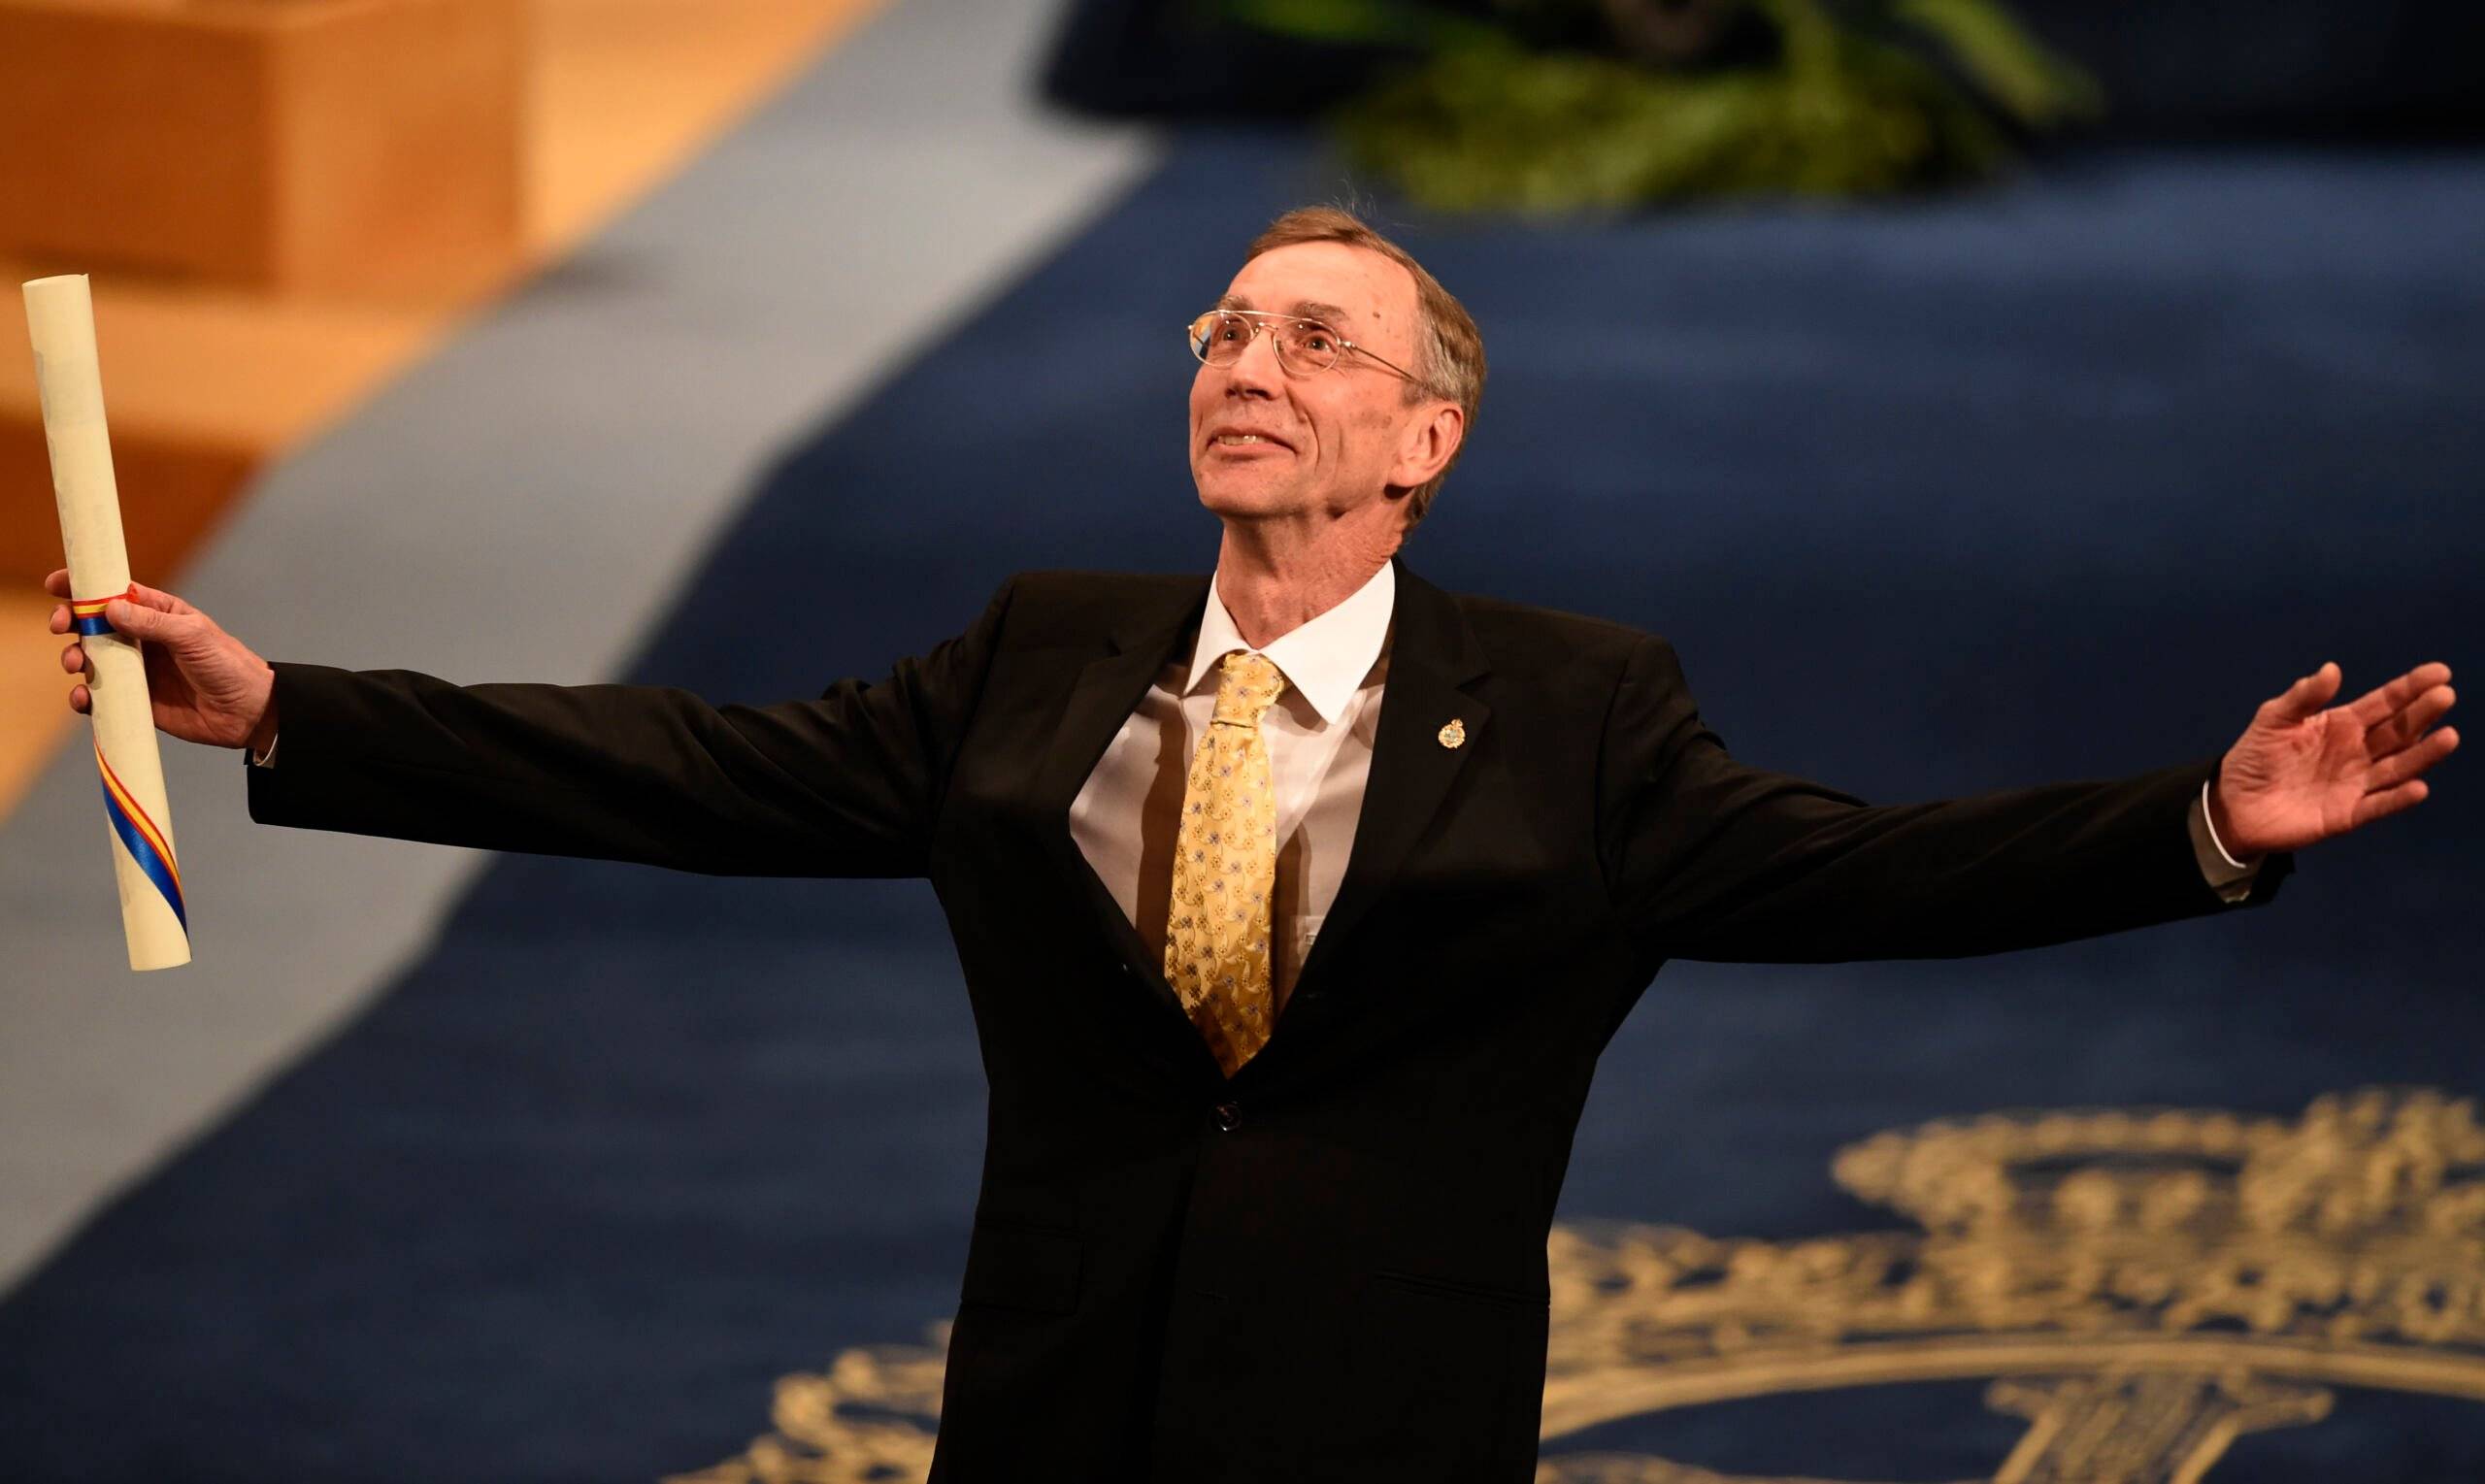 (FILES) In this file photo taken on October 19, 2018 Swedish biologist Svante Paabo celebrates on the stage after receiving the 2018 Princess of Asturias Award for Technical and Scientific Research during the Princess of Asturias Awards ceremony at the Campoamor Theatre in Oviedo, on October 19, 2018. - Swedish paleogeneticist Svante Paabo, who sequenced the genome of the Neanderthal and discovered the previously unknown hominin Denisova, on October 3, 2022 won the Nobel Medicine Prize. (Photo by MIGUEL RIOPA / AFP)